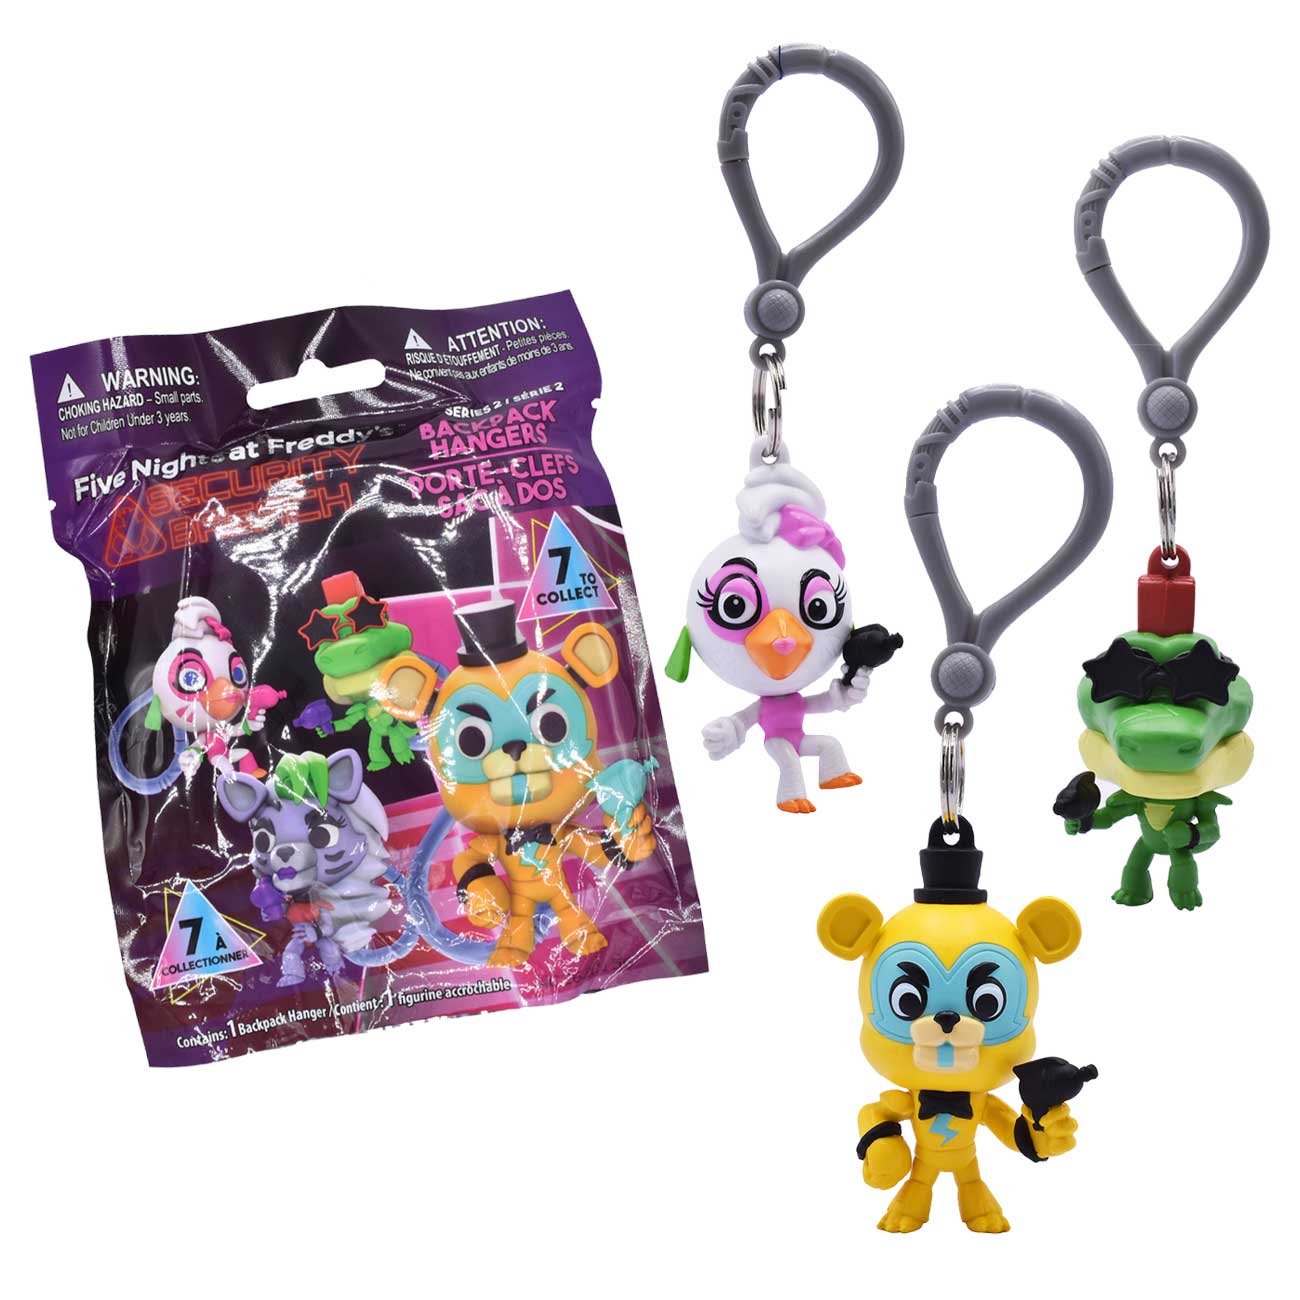 Just Toys LLC Five Nights at Freddy's Security Breach Hiding Kit